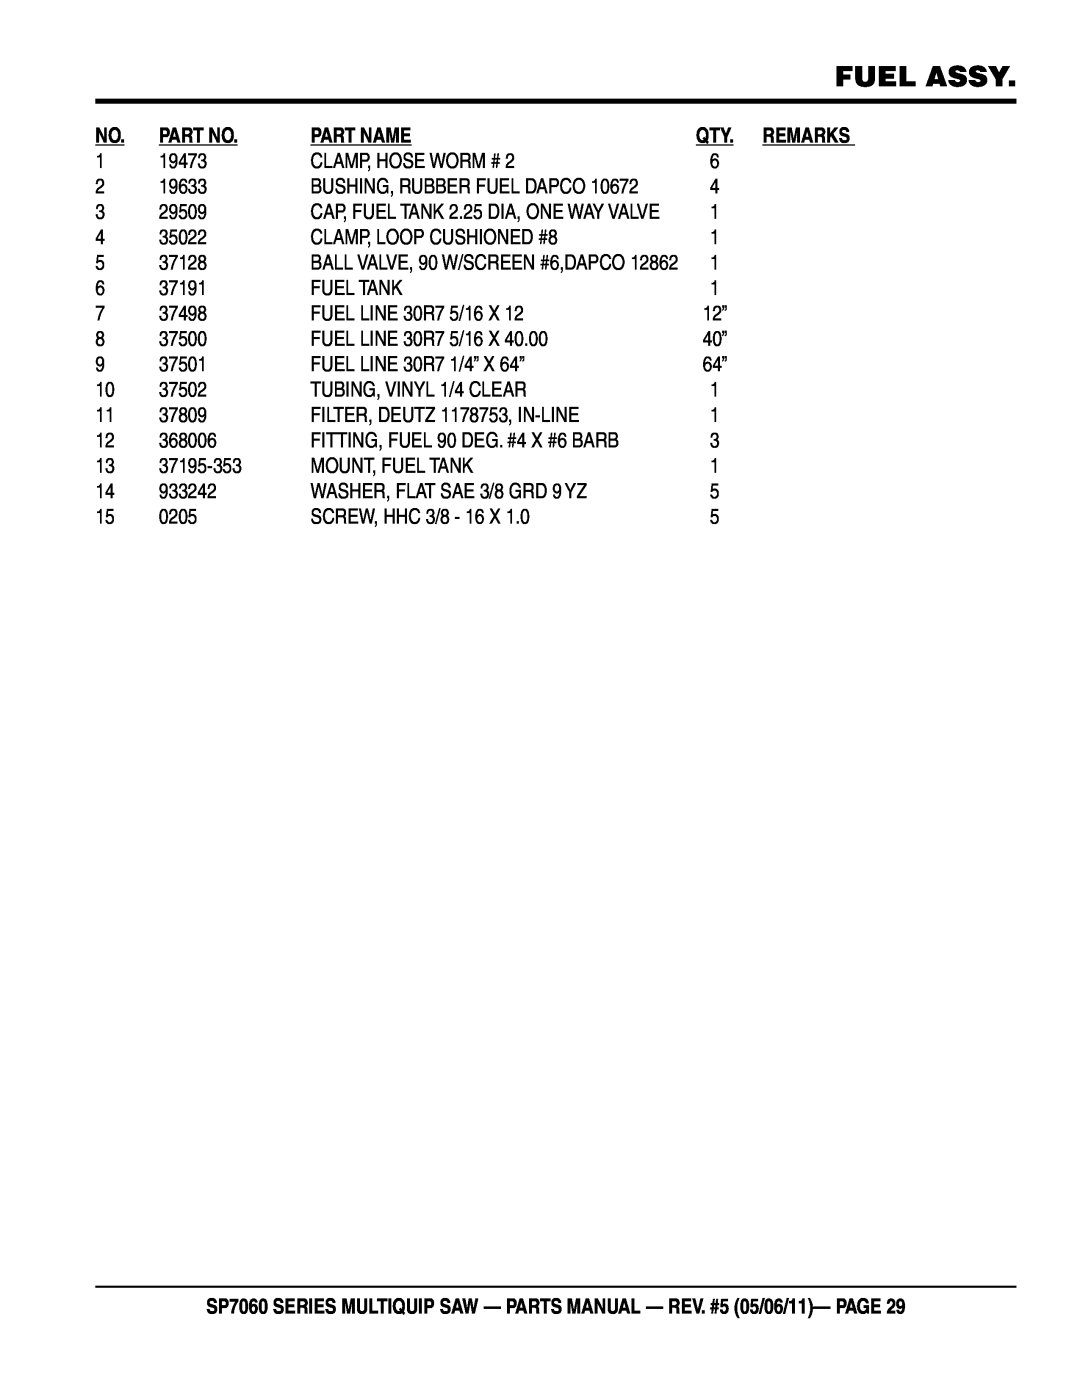 Multiquip SP706012 Qty. Remarks, Fuel Assy, Part Name, SP7060 SERIES MULTIQUIP SAW - PARTS MANUAL - REV. #5 05/06/11- PAGE 